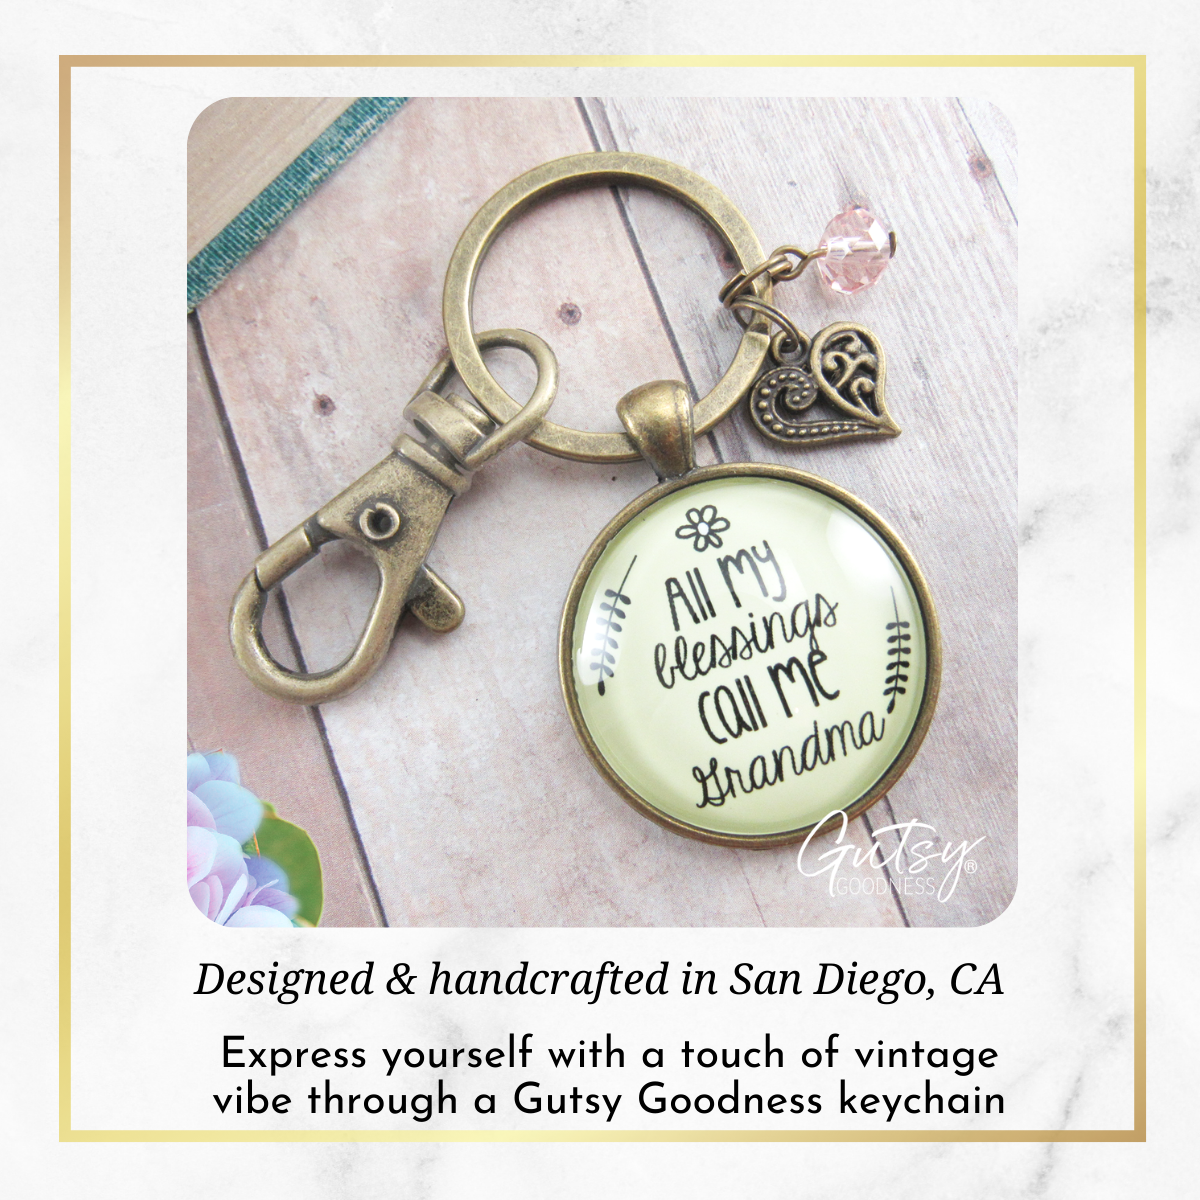 Grandma Keychain All My Blessings Grandmother Womens Family Gift Jewelry - Gutsy Goodness Handmade Jewelry;Grandma Keychain All My Blessings Grandmother Womens Family Gift Jewelry - Gutsy Goodness Handmade Jewelry Gifts